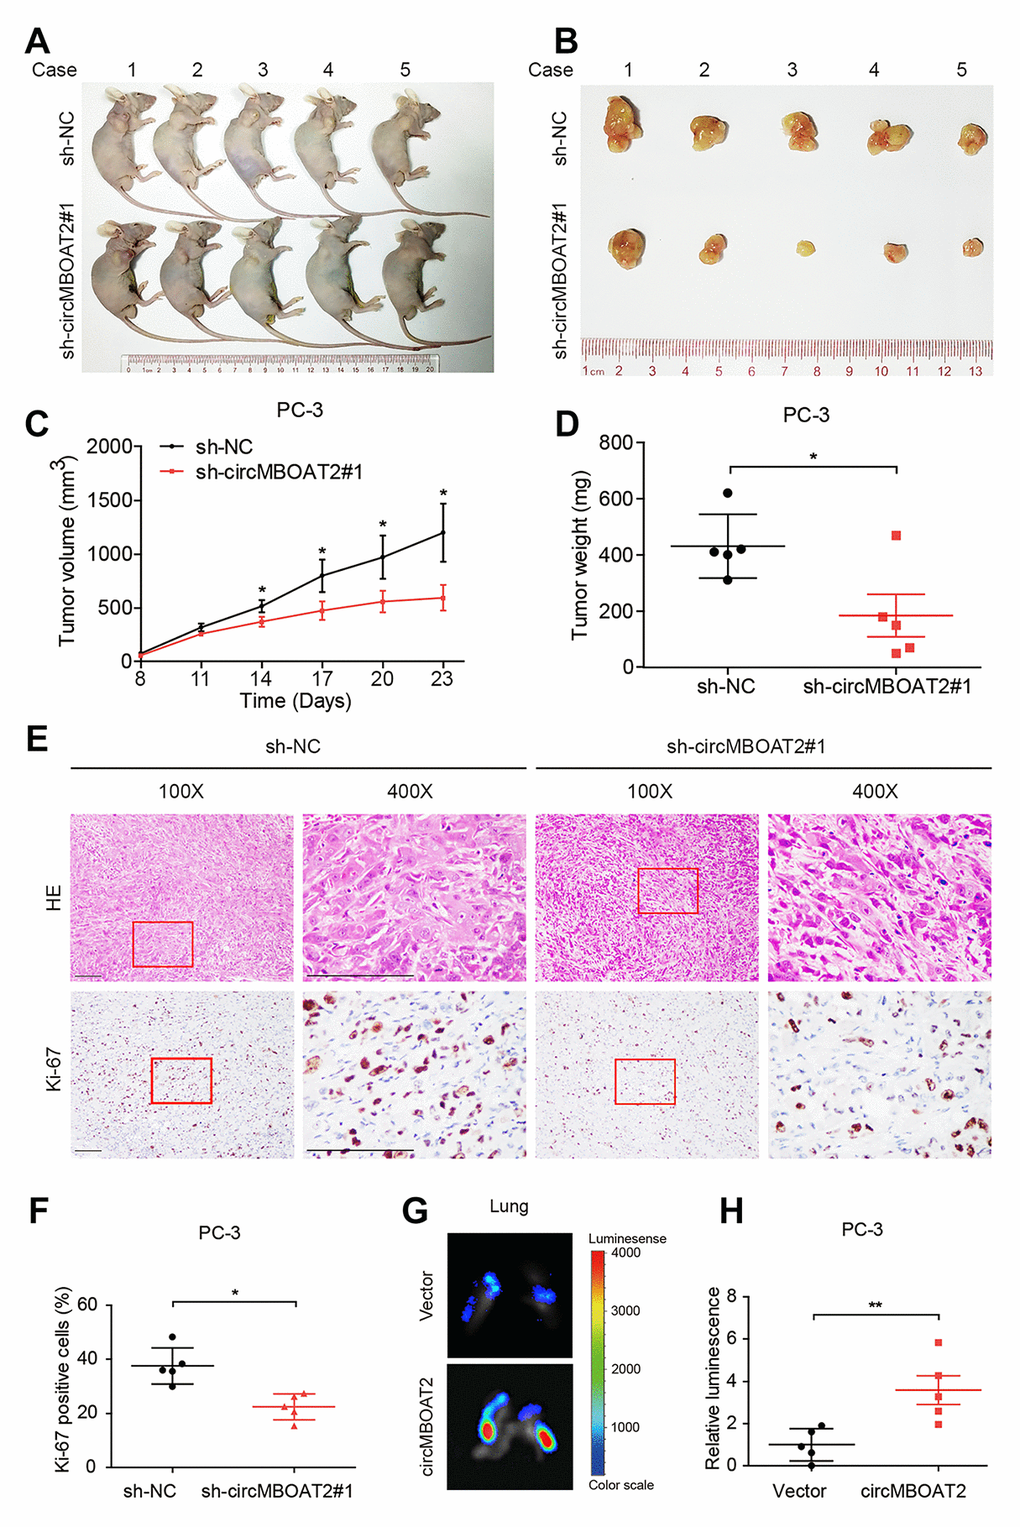 circMBOAT2 promotes tumorigenesis and metastasis in vivo. (A, B) Images of the xenograft subcutaneous models of PC-3 cells stably transfected with sh-circMBOAT2#1 or sh-NC. (C, D) Tumor volumes and weights of subcutaneous xenograft tumors. (E, F) Representative images of IHC staining and analysis of Ki-67 expression. Scale bars: 100 μm. (G, H) Representative bioluminescence images and analysis of excised lungs from xenograft metastatic models. Data are displayed as mean ± SD. *p p 